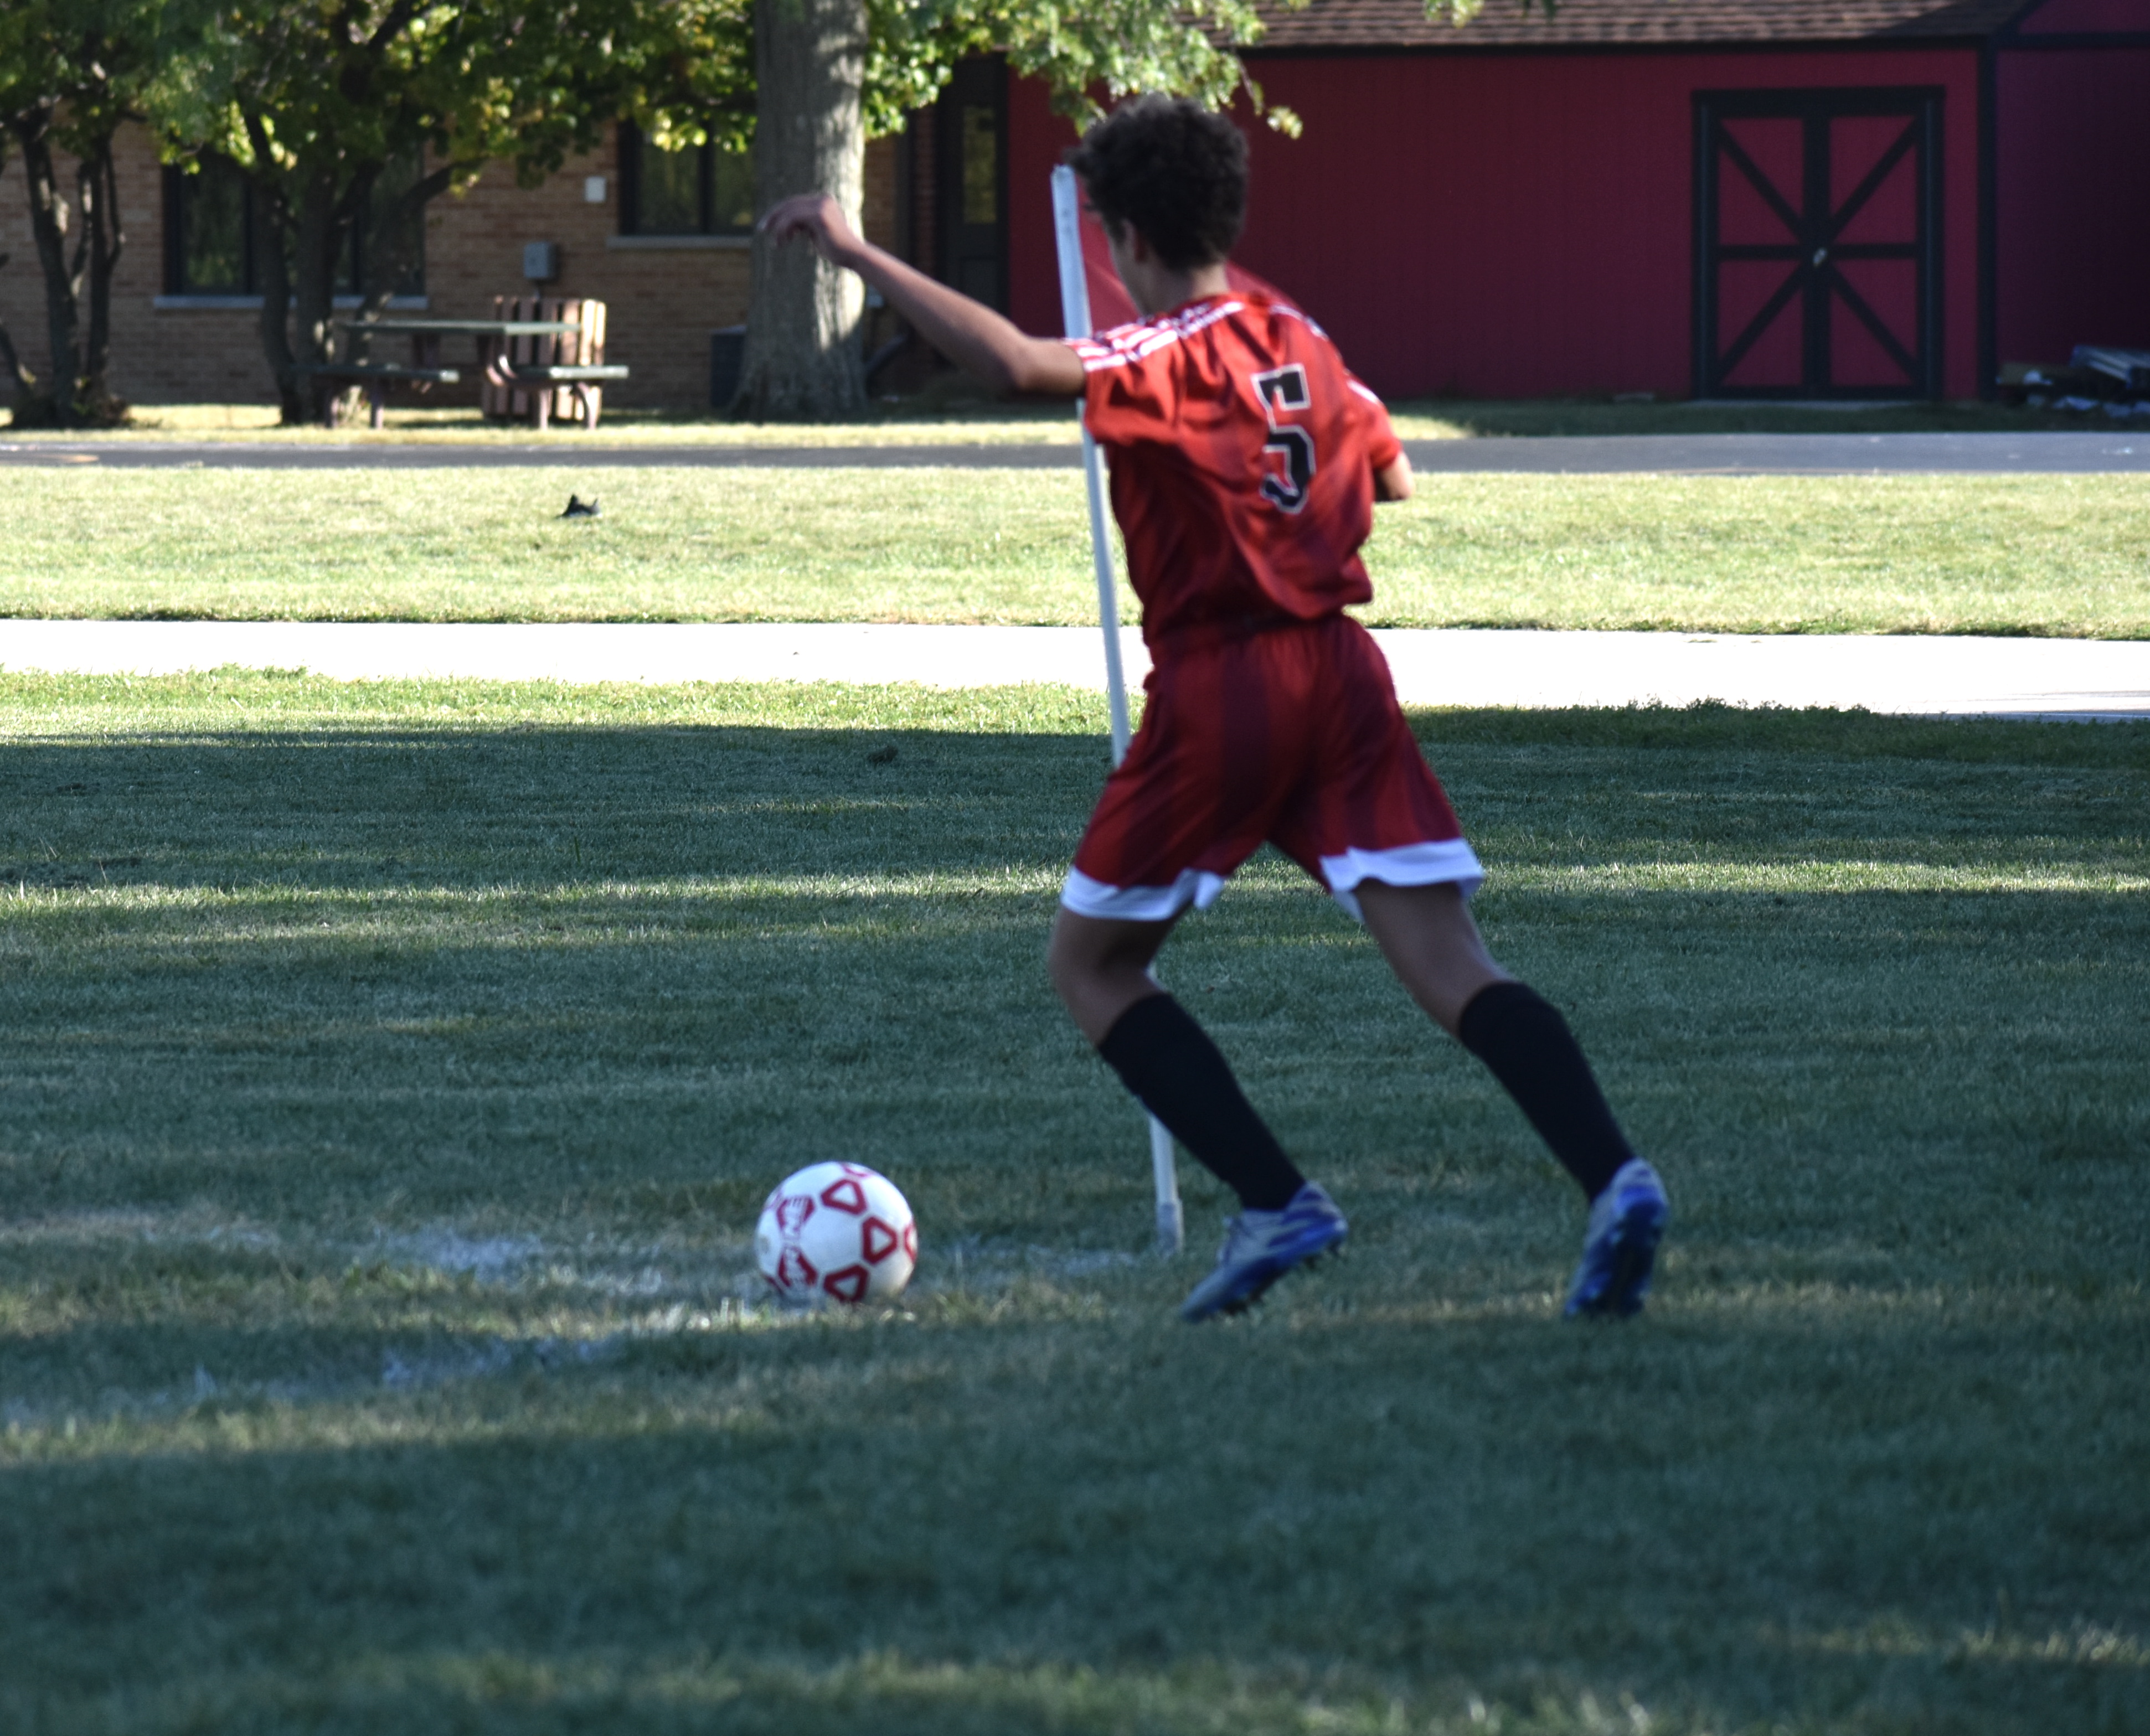 soccer player gets ready to kick the ball into play during a game